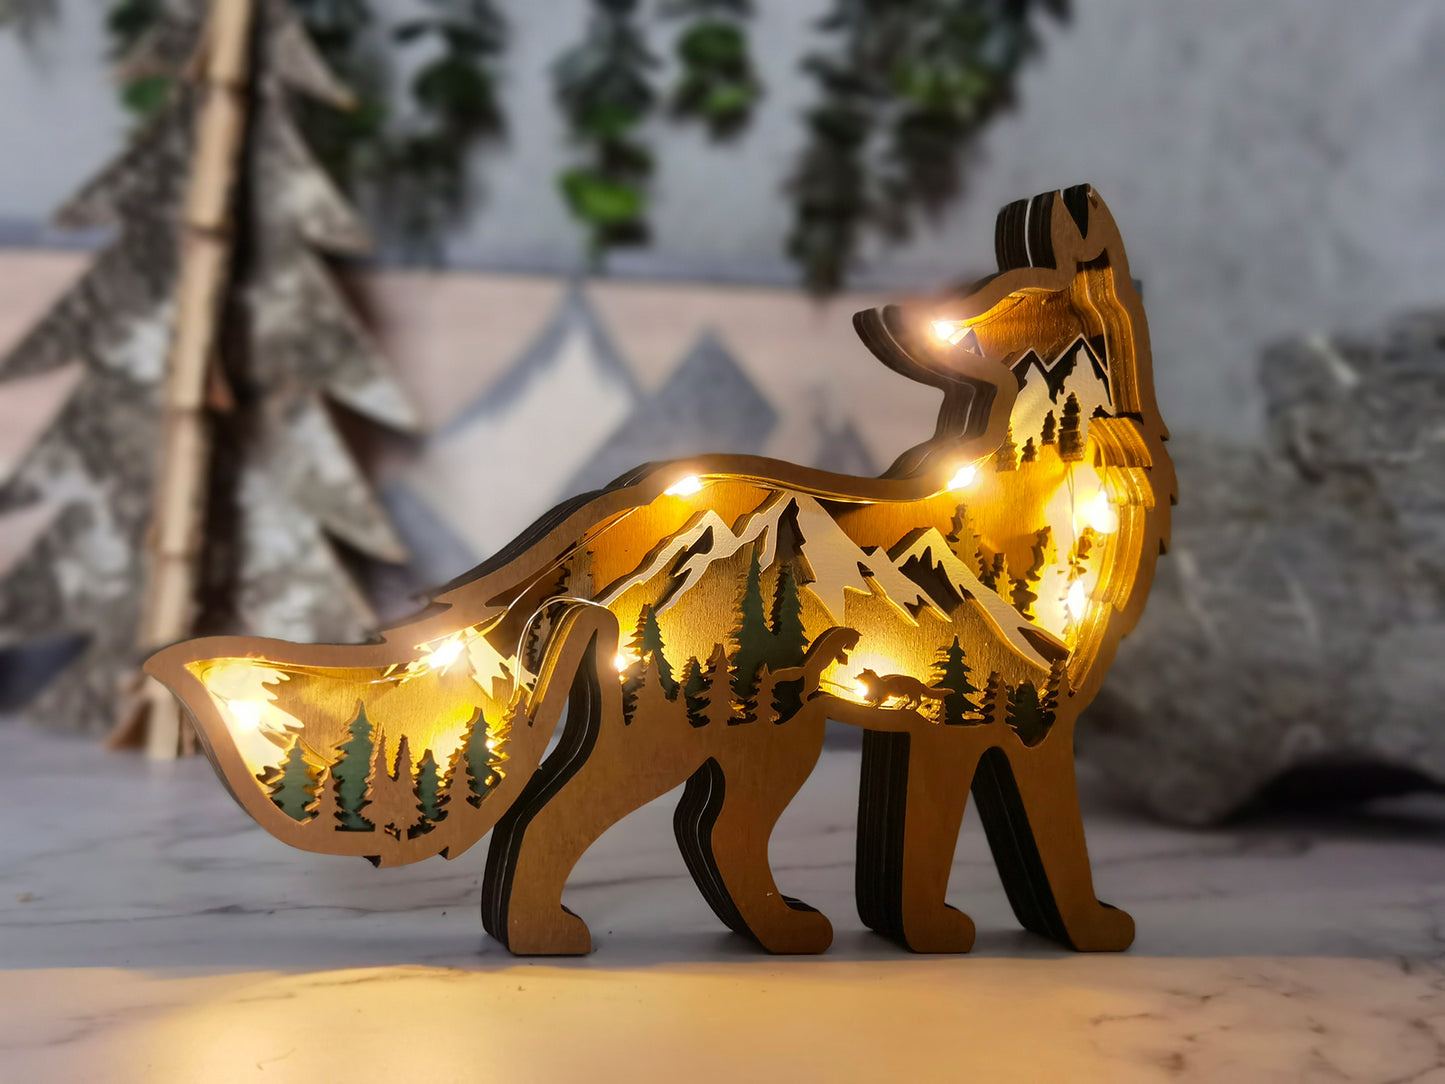 3D Wooden Fox carved with lights ,Wooden Forest Scene,Desktop ornaments,Wall Decoration,Door Decor,Free Engraving